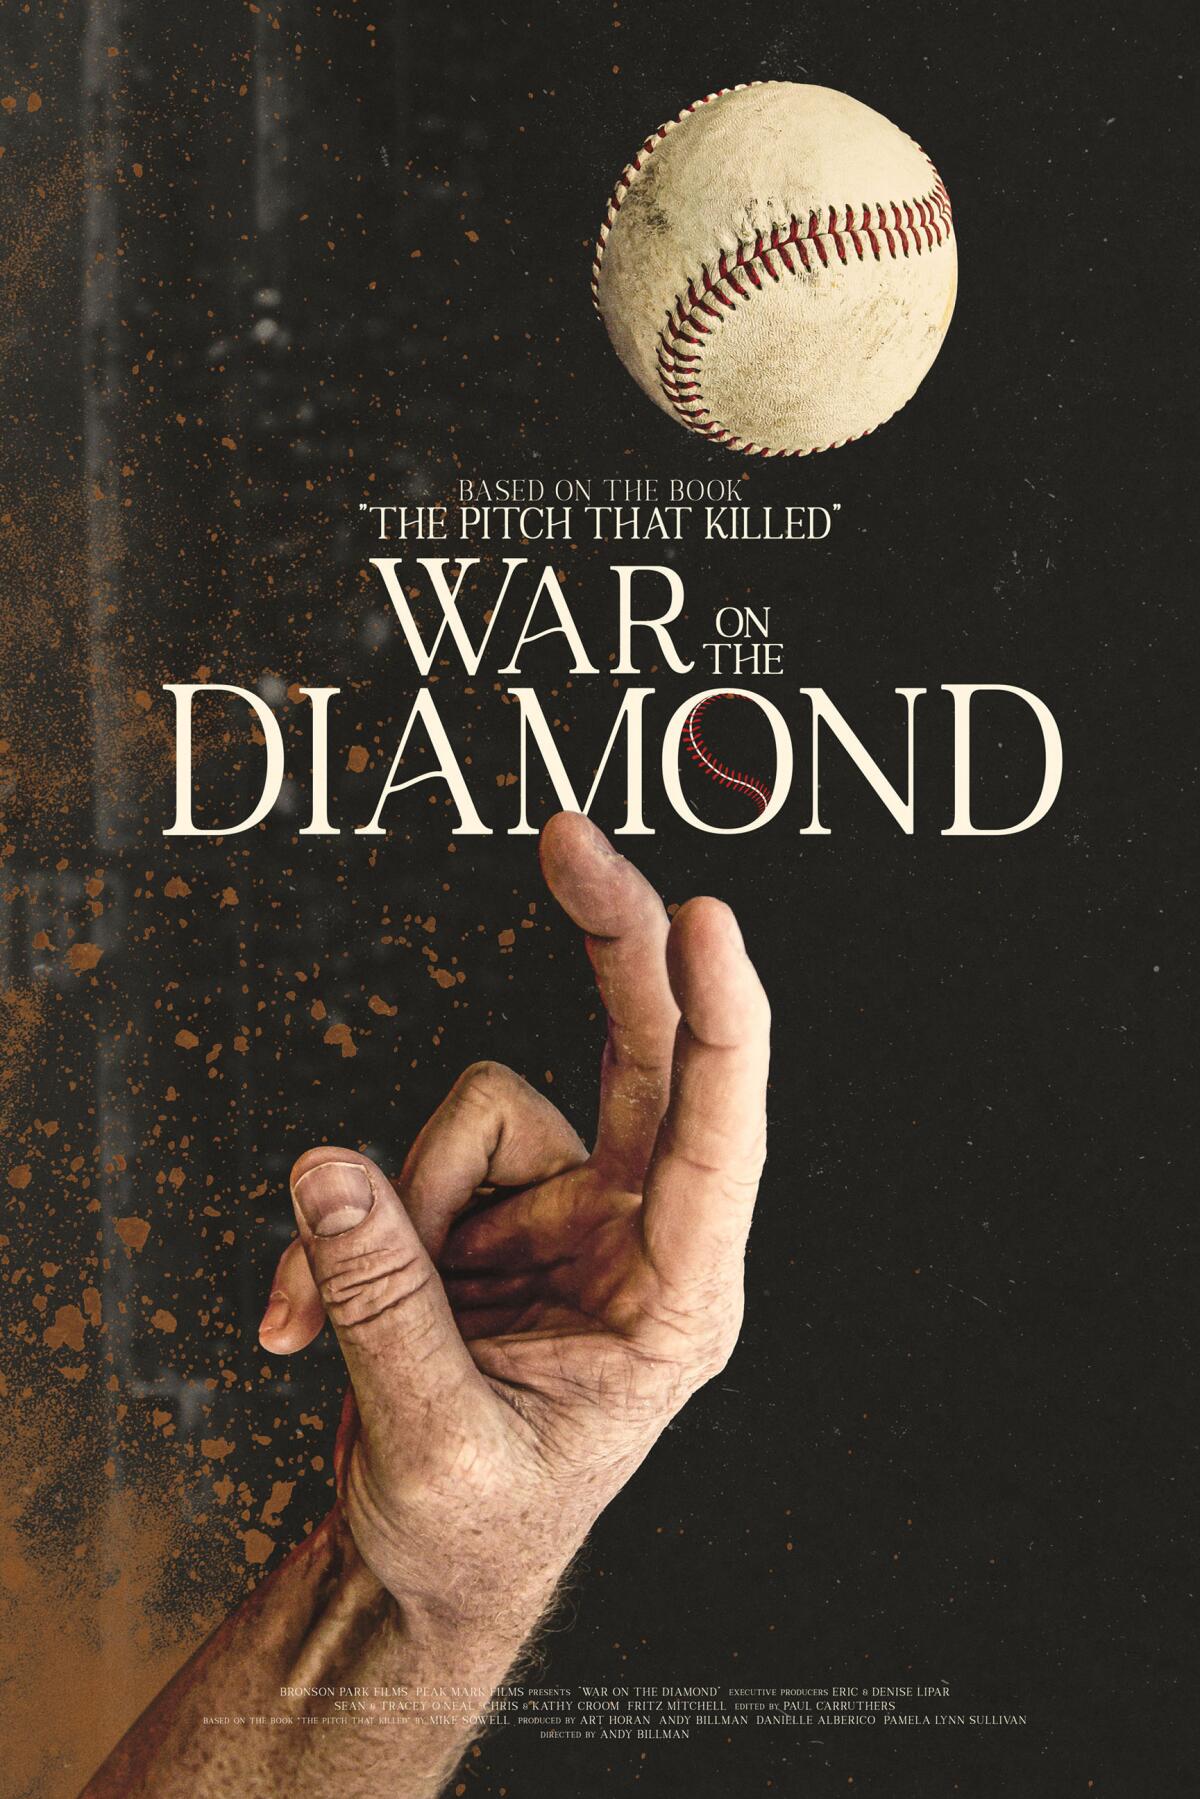 "War on the Diamond" is a documentary coming to the Newport Beach Film Festival.